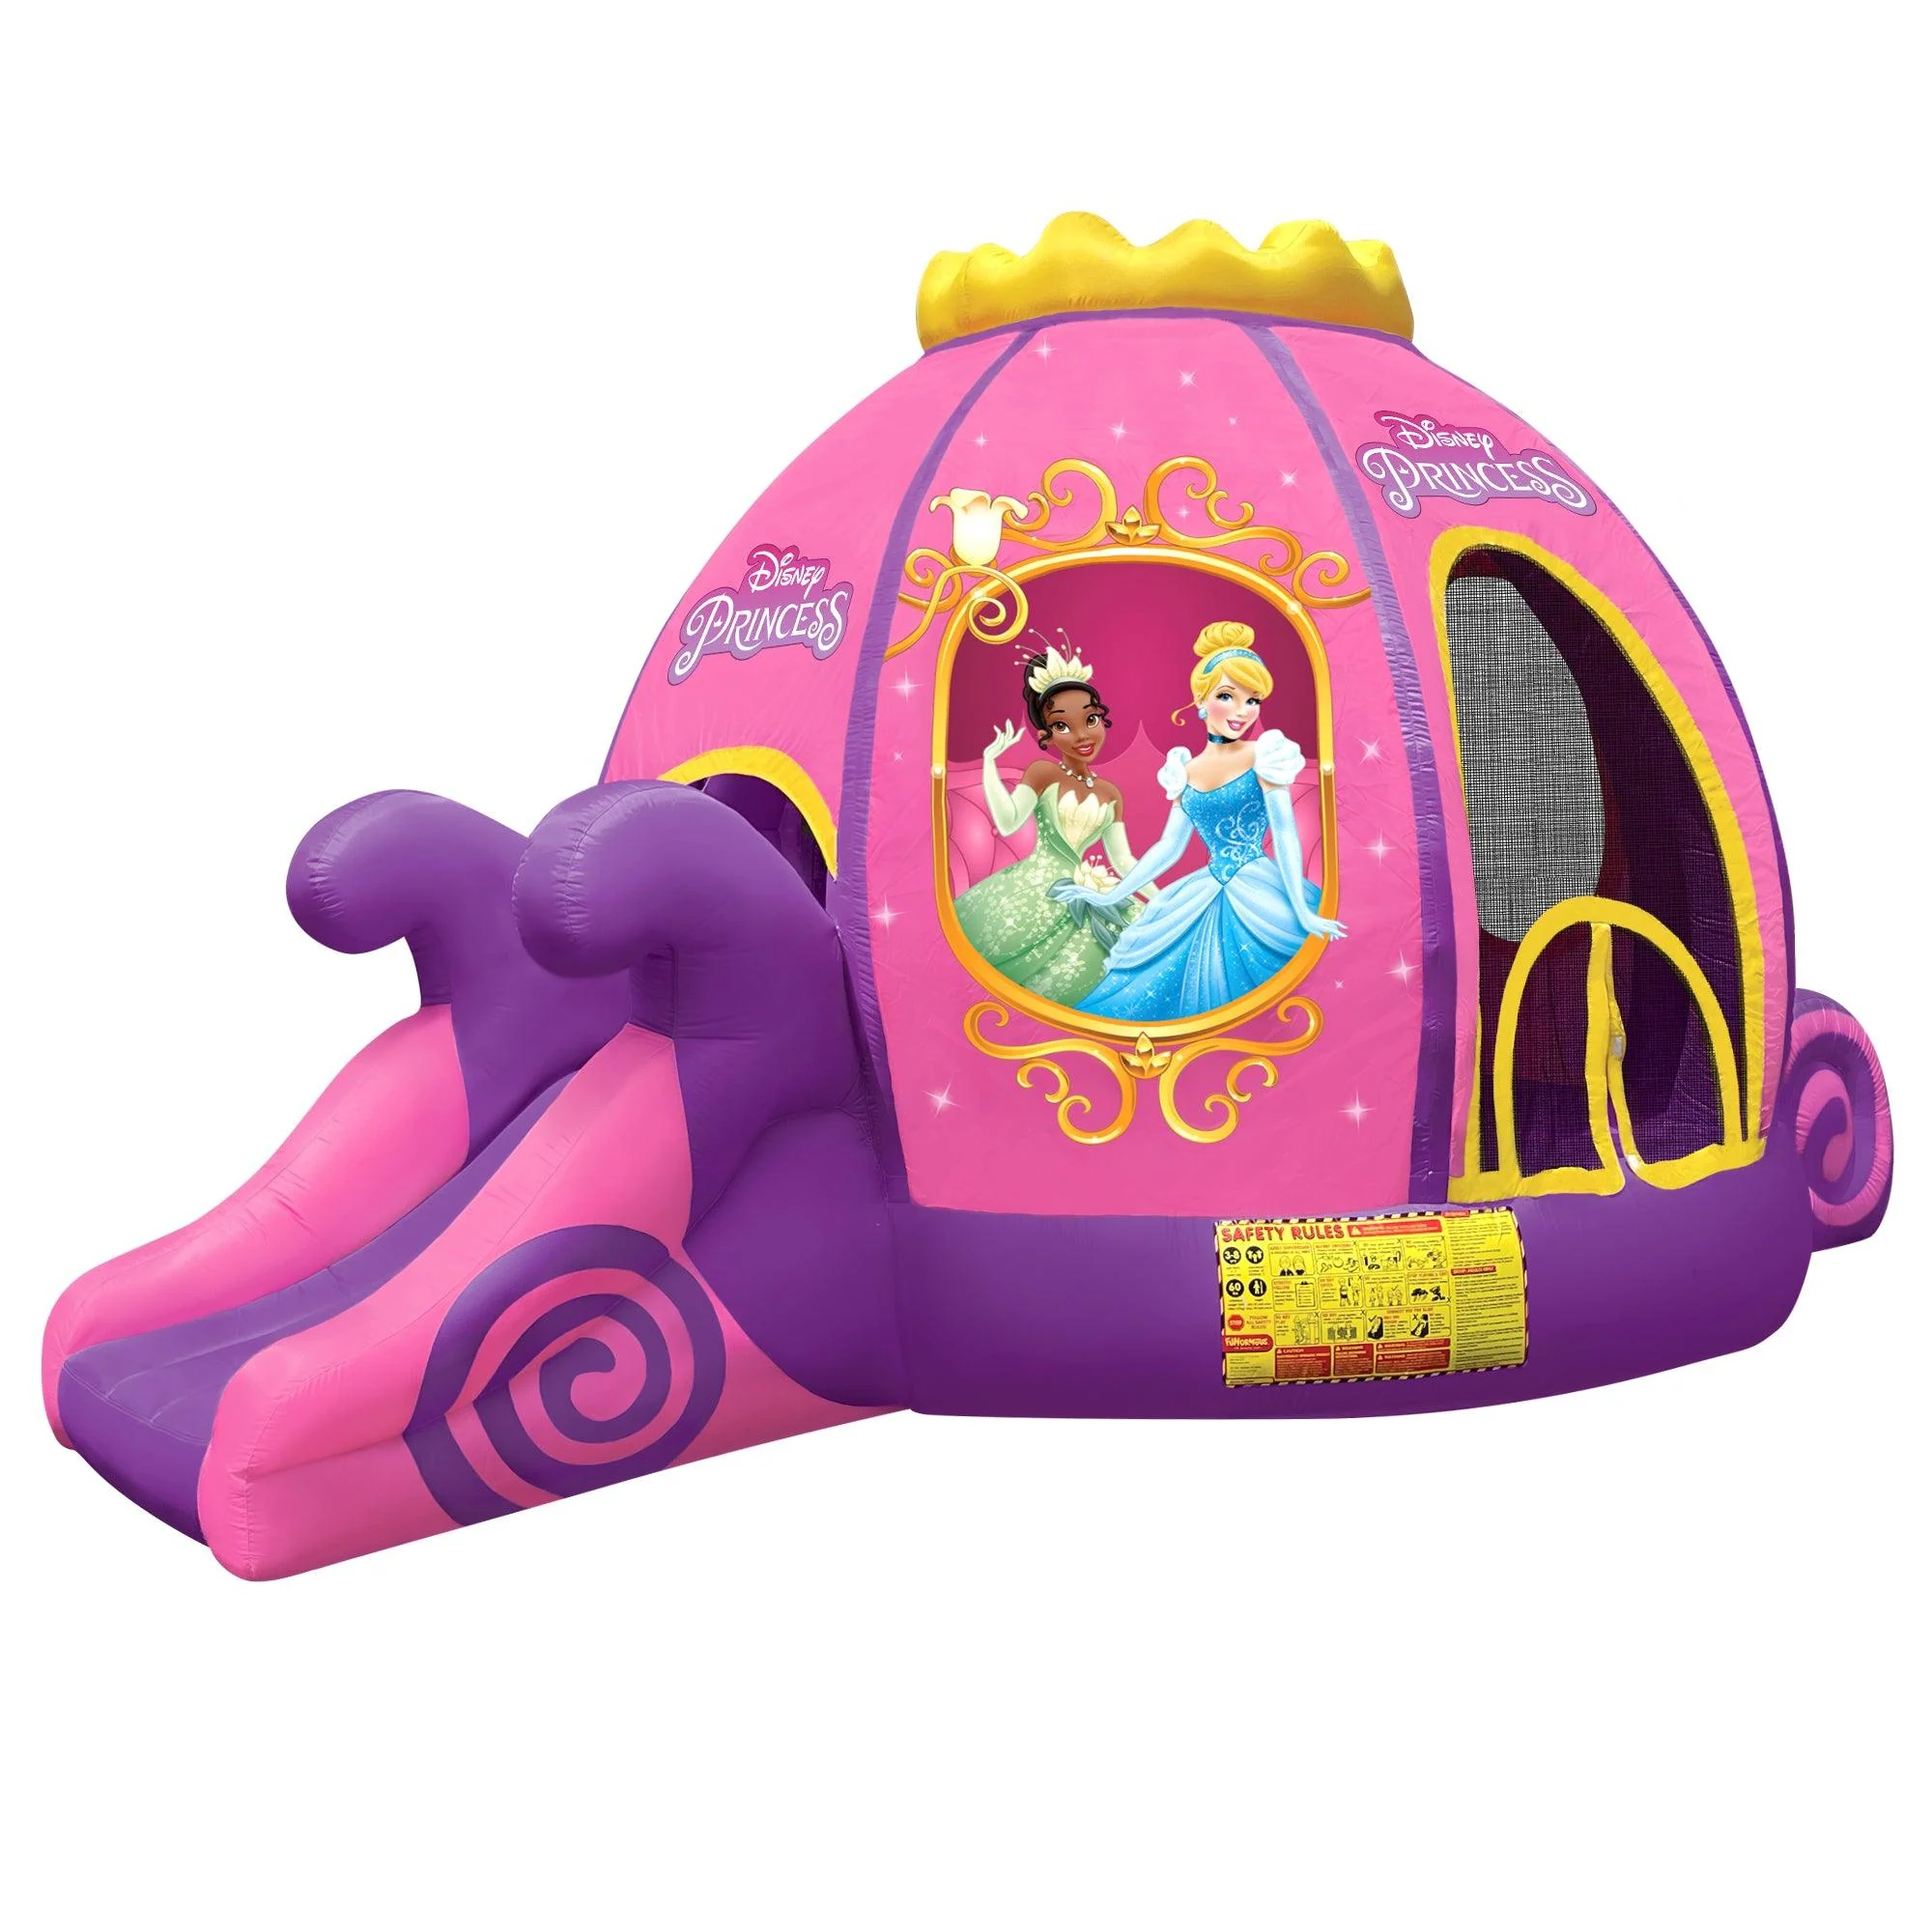 Disney Princess Inflatable Bounce House, Indoors, Outdoors, Ball Pit